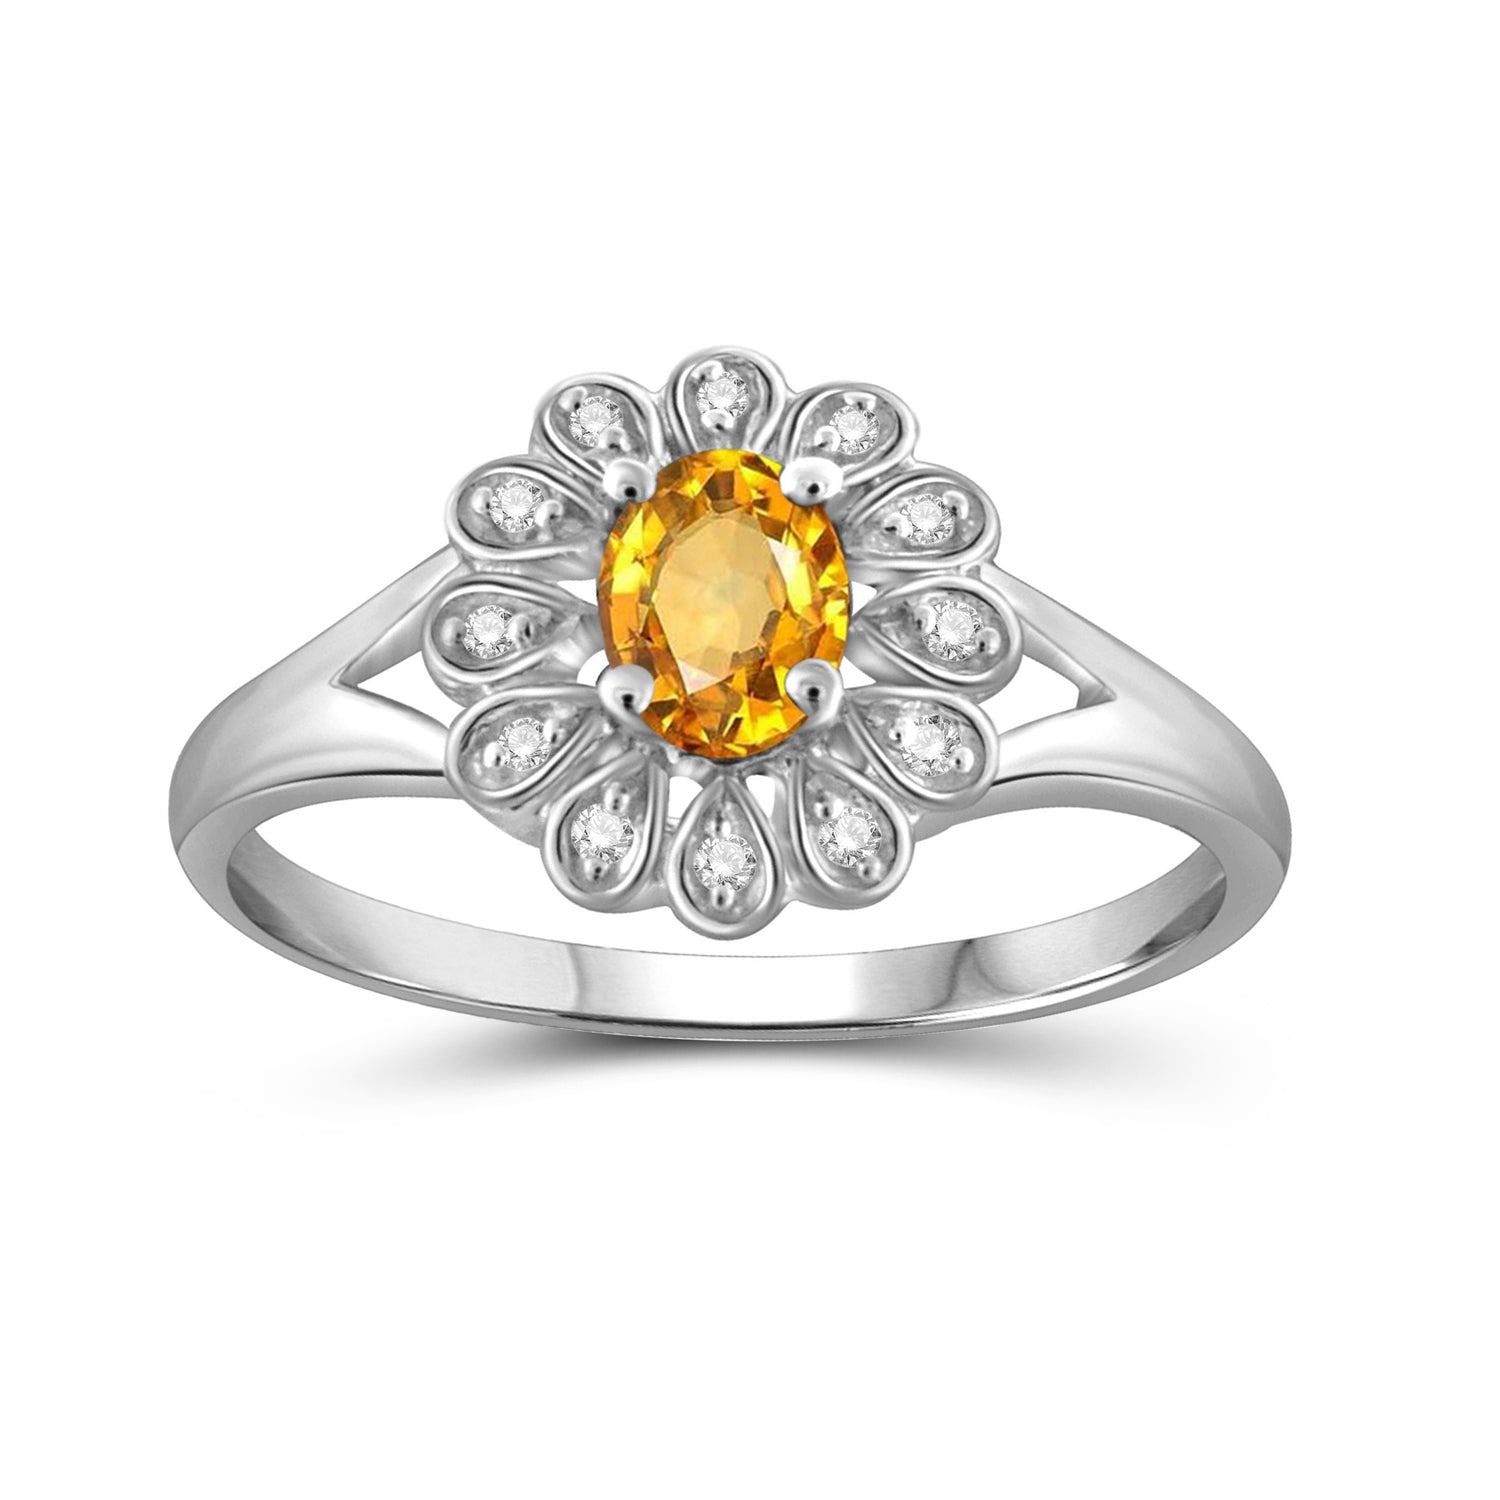 1/4 Carat T.G.W. Citrine And 1/20 Carat T.W. White Diamond Sterling Silver Ring